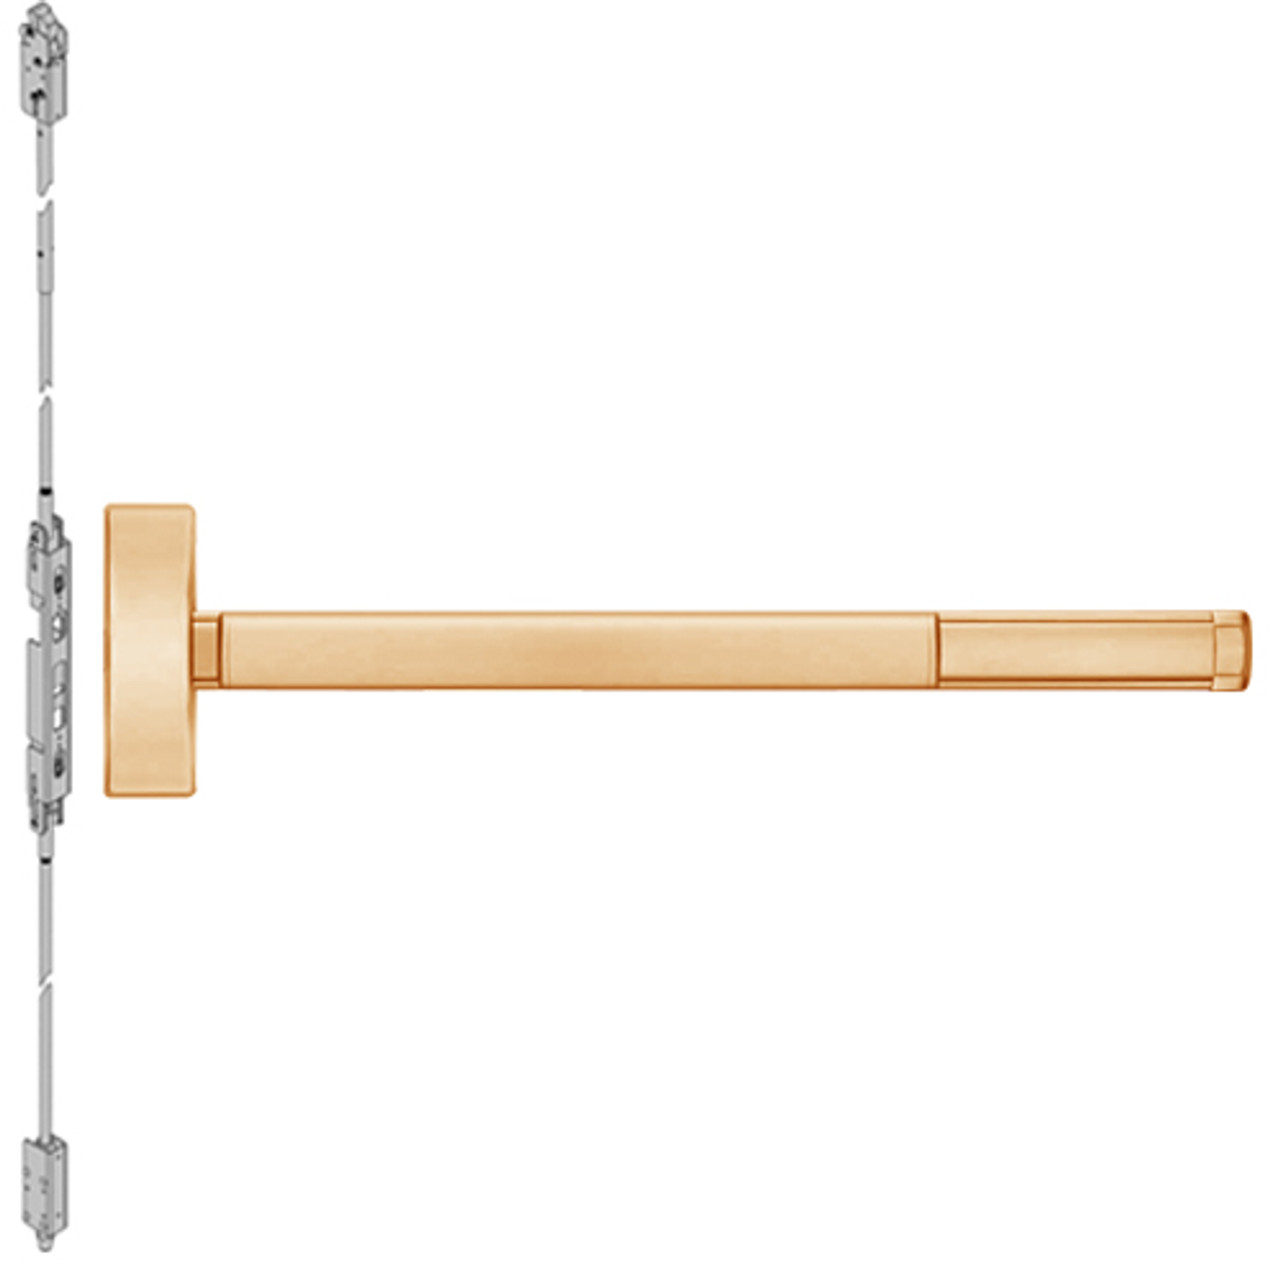 ELR2805LBR-612-48 PHI 2800 Series Concealed Vertical Rod Exit Device with Electric Latch Retraction Prepped for Key Controls Thumb Piece in Satin Bronze Finish